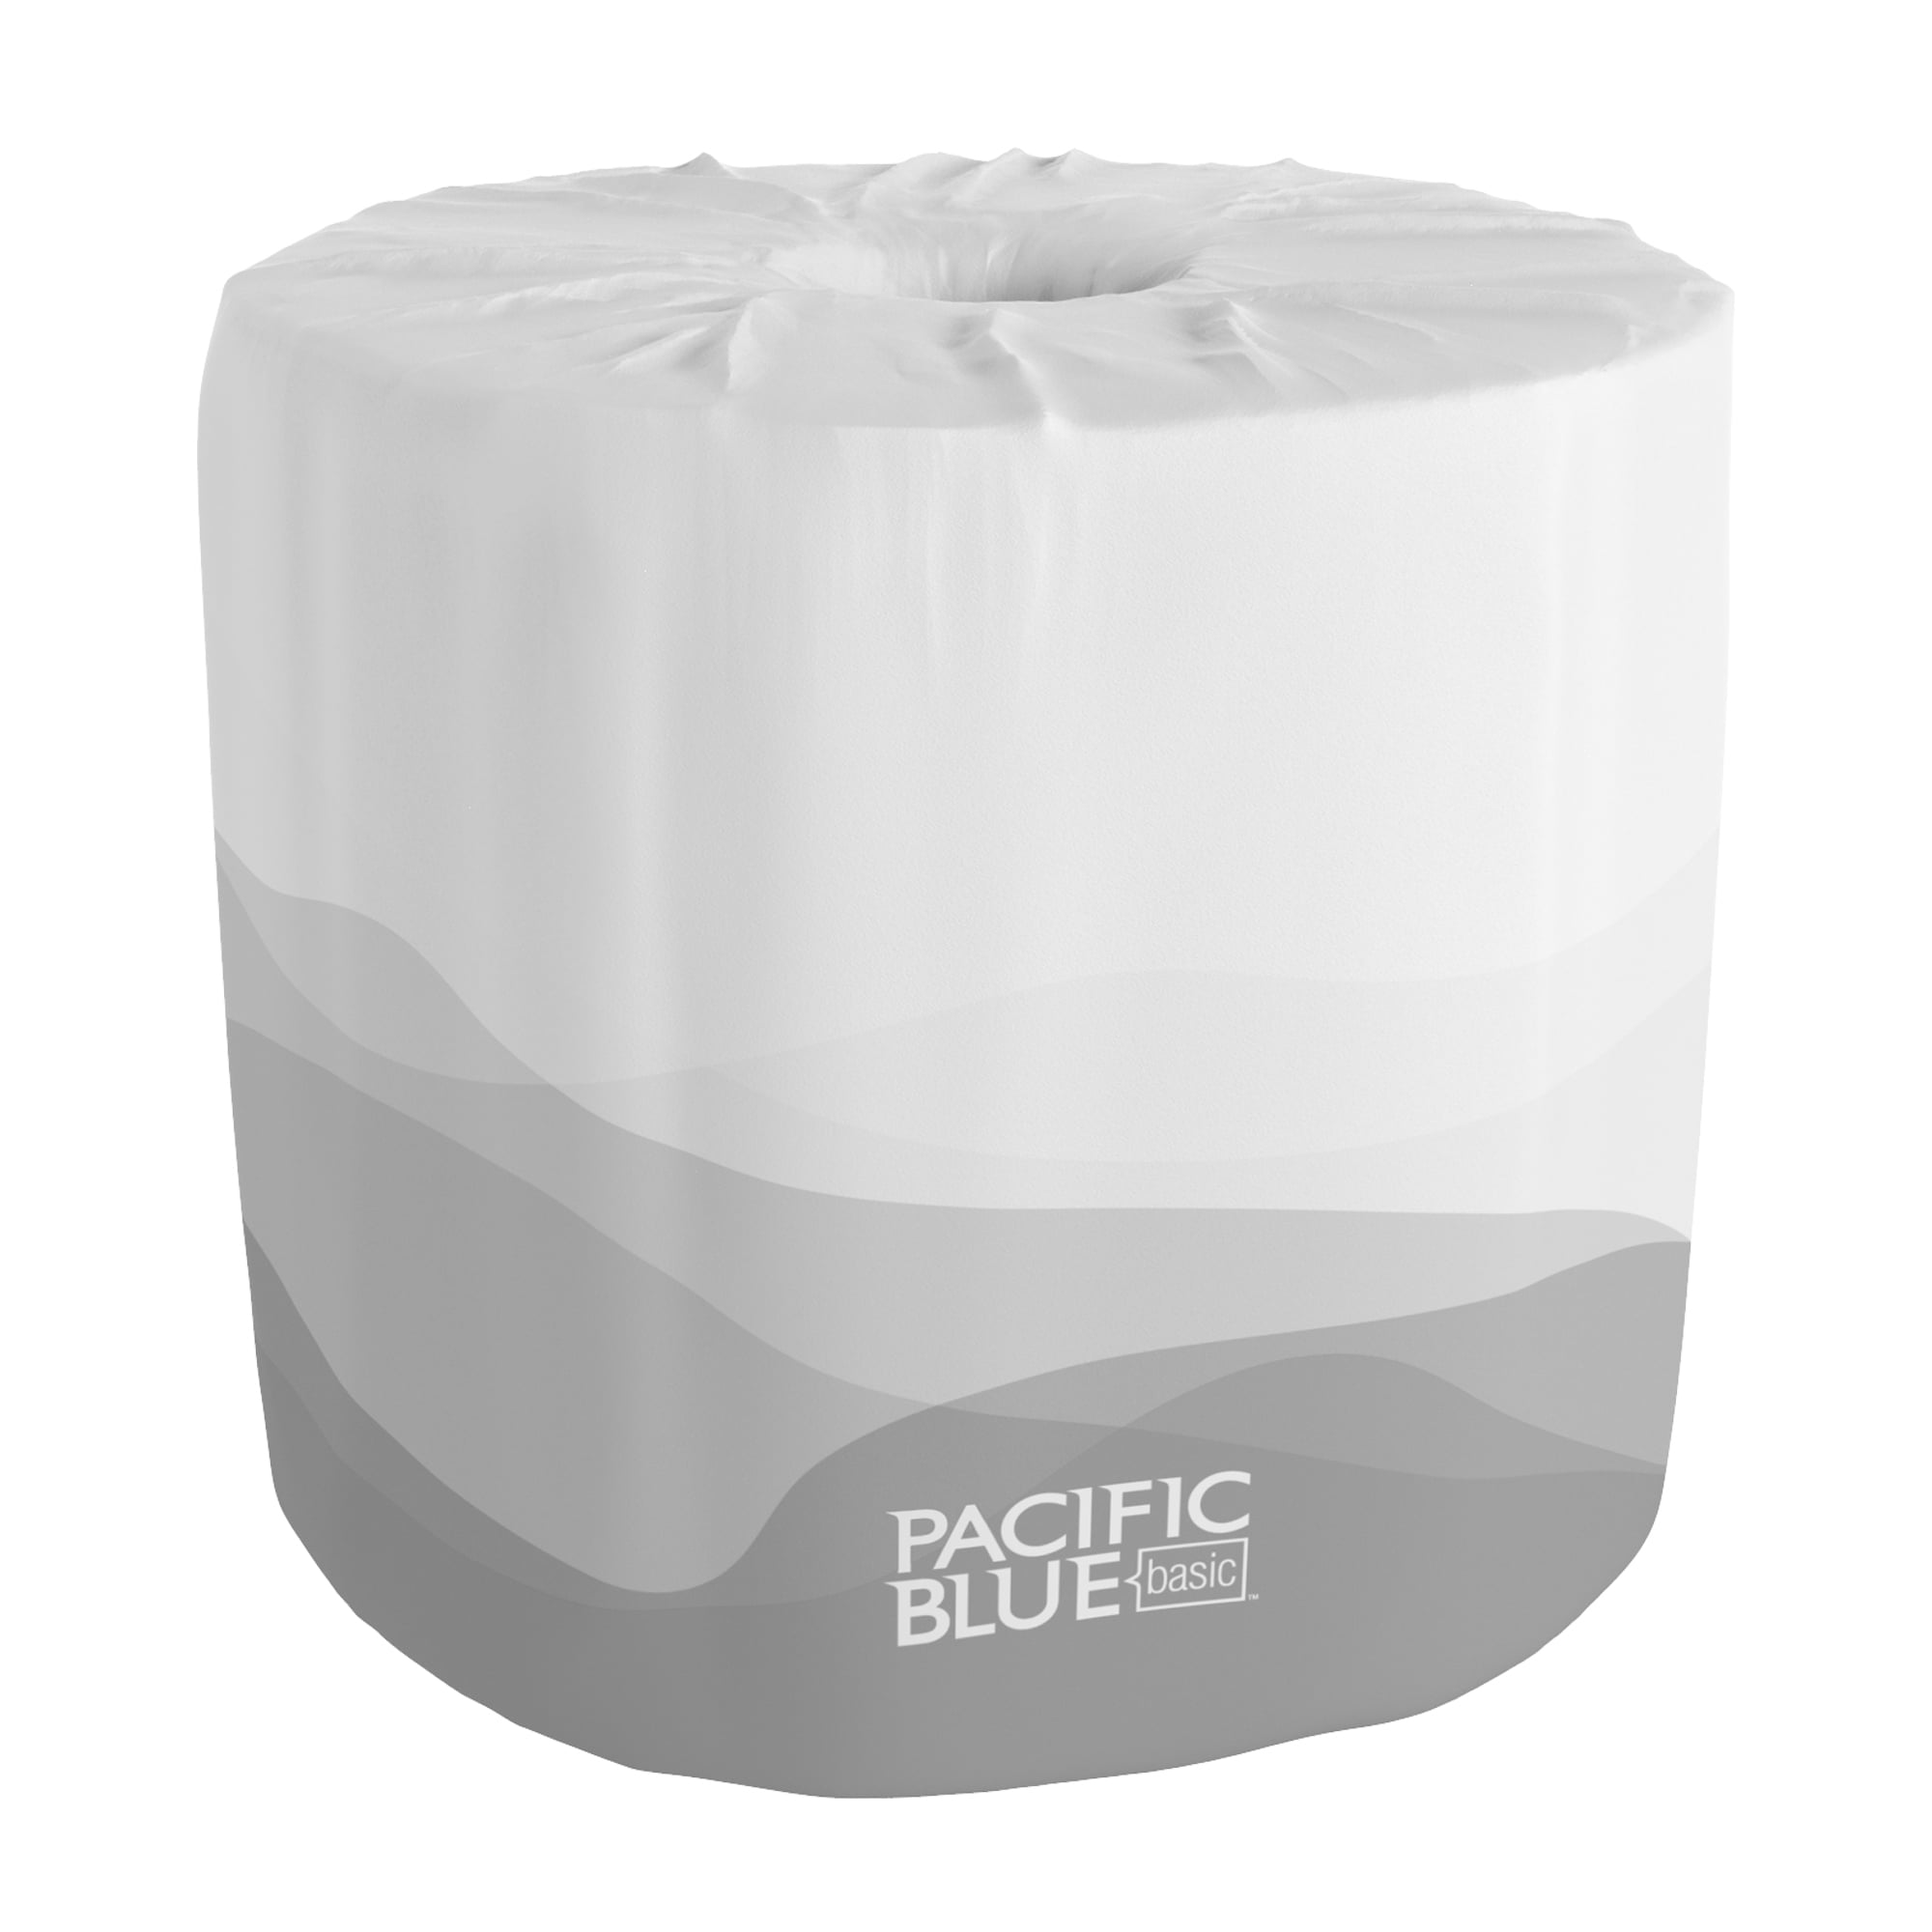 Georgia Pacific Professional Pacific Blue Basic Bathroom Tissue, Septic  Safe, 2-Ply, White, 550 Sheets/Roll, 80 Rolls/Carton -GPC1988001 